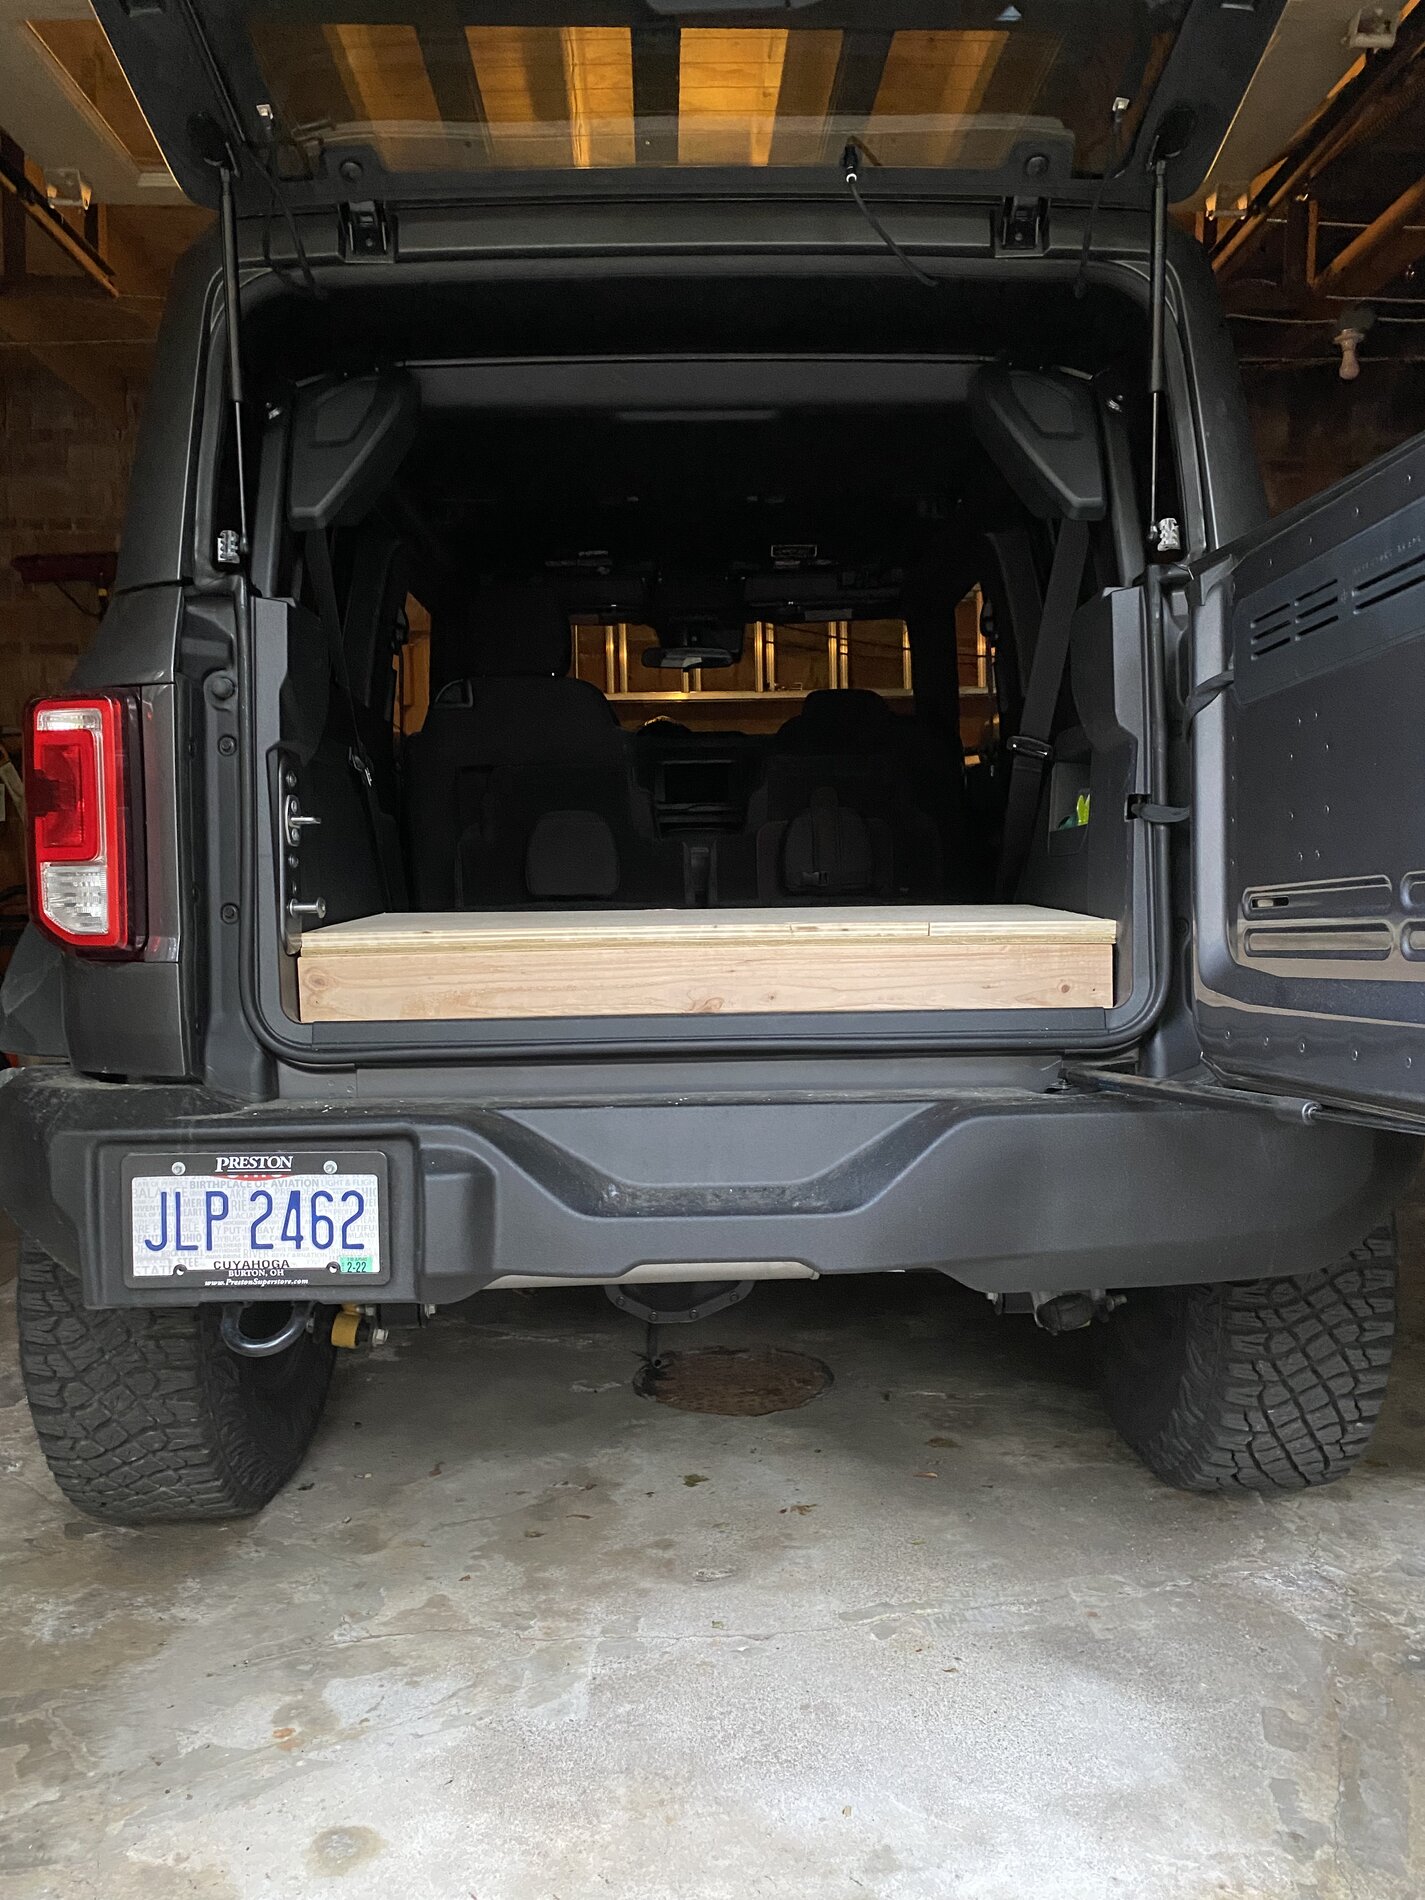 Ford Bronco BaseSquatch DELIVERED : 2 Door Base Sasquatch [UPDATE - NOW WITH MORE PICTURES & REVIEW] 5CC0BEFD-E23F-4702-AF75-0465B5BFD6D5